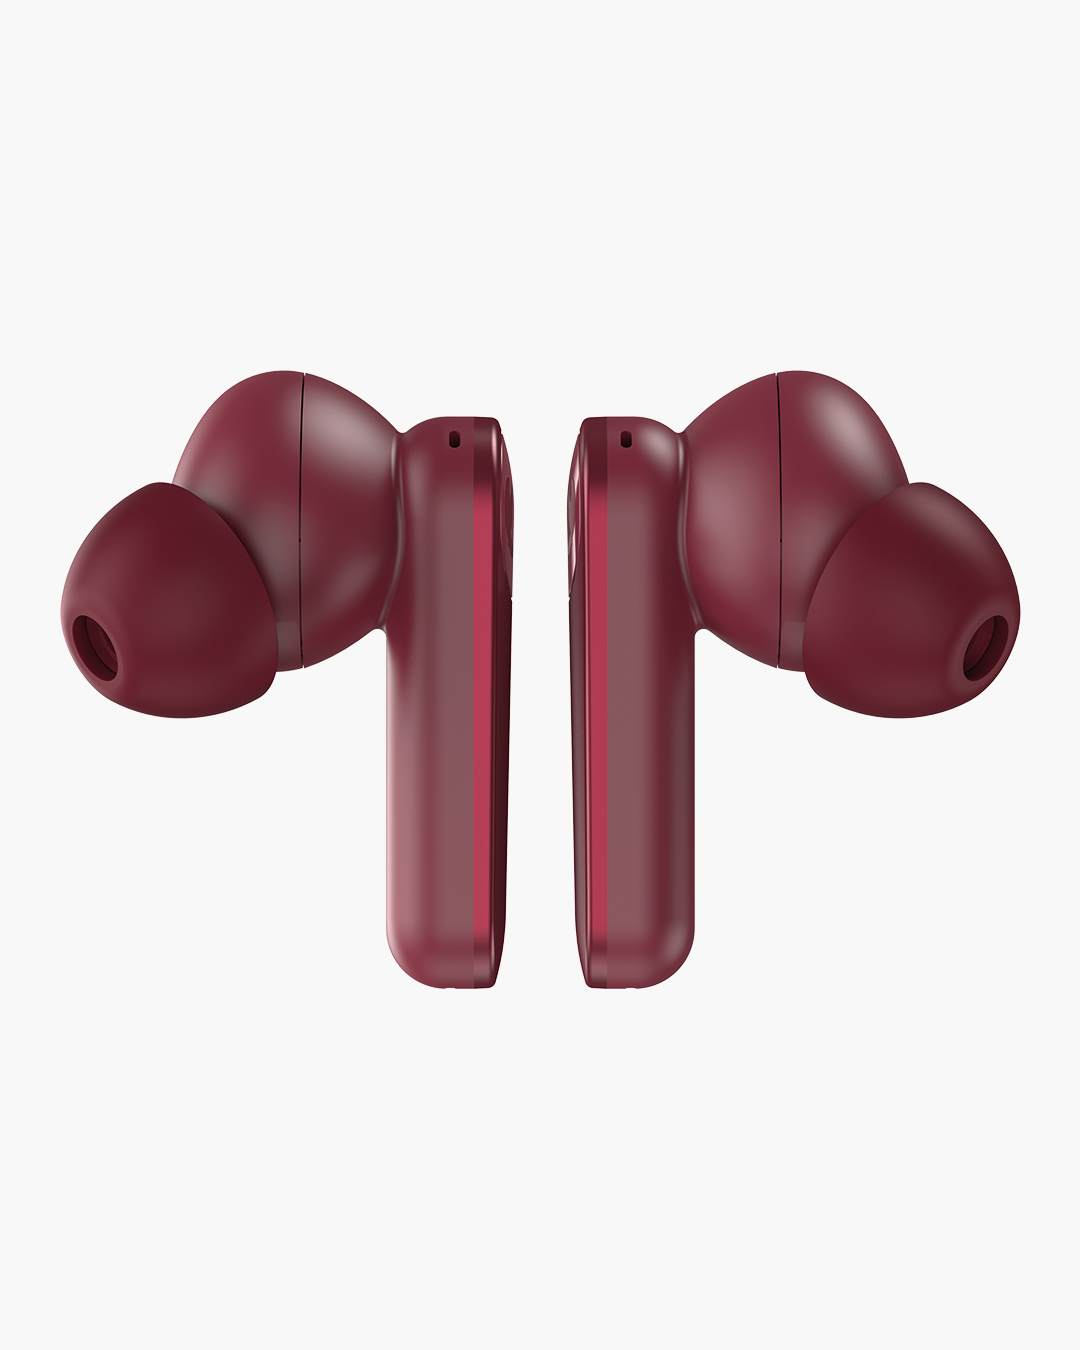 Fresh 'n Rebel - Twins ANC - True Wireless In-ear headphones with active noise cancelling - Ruby Red